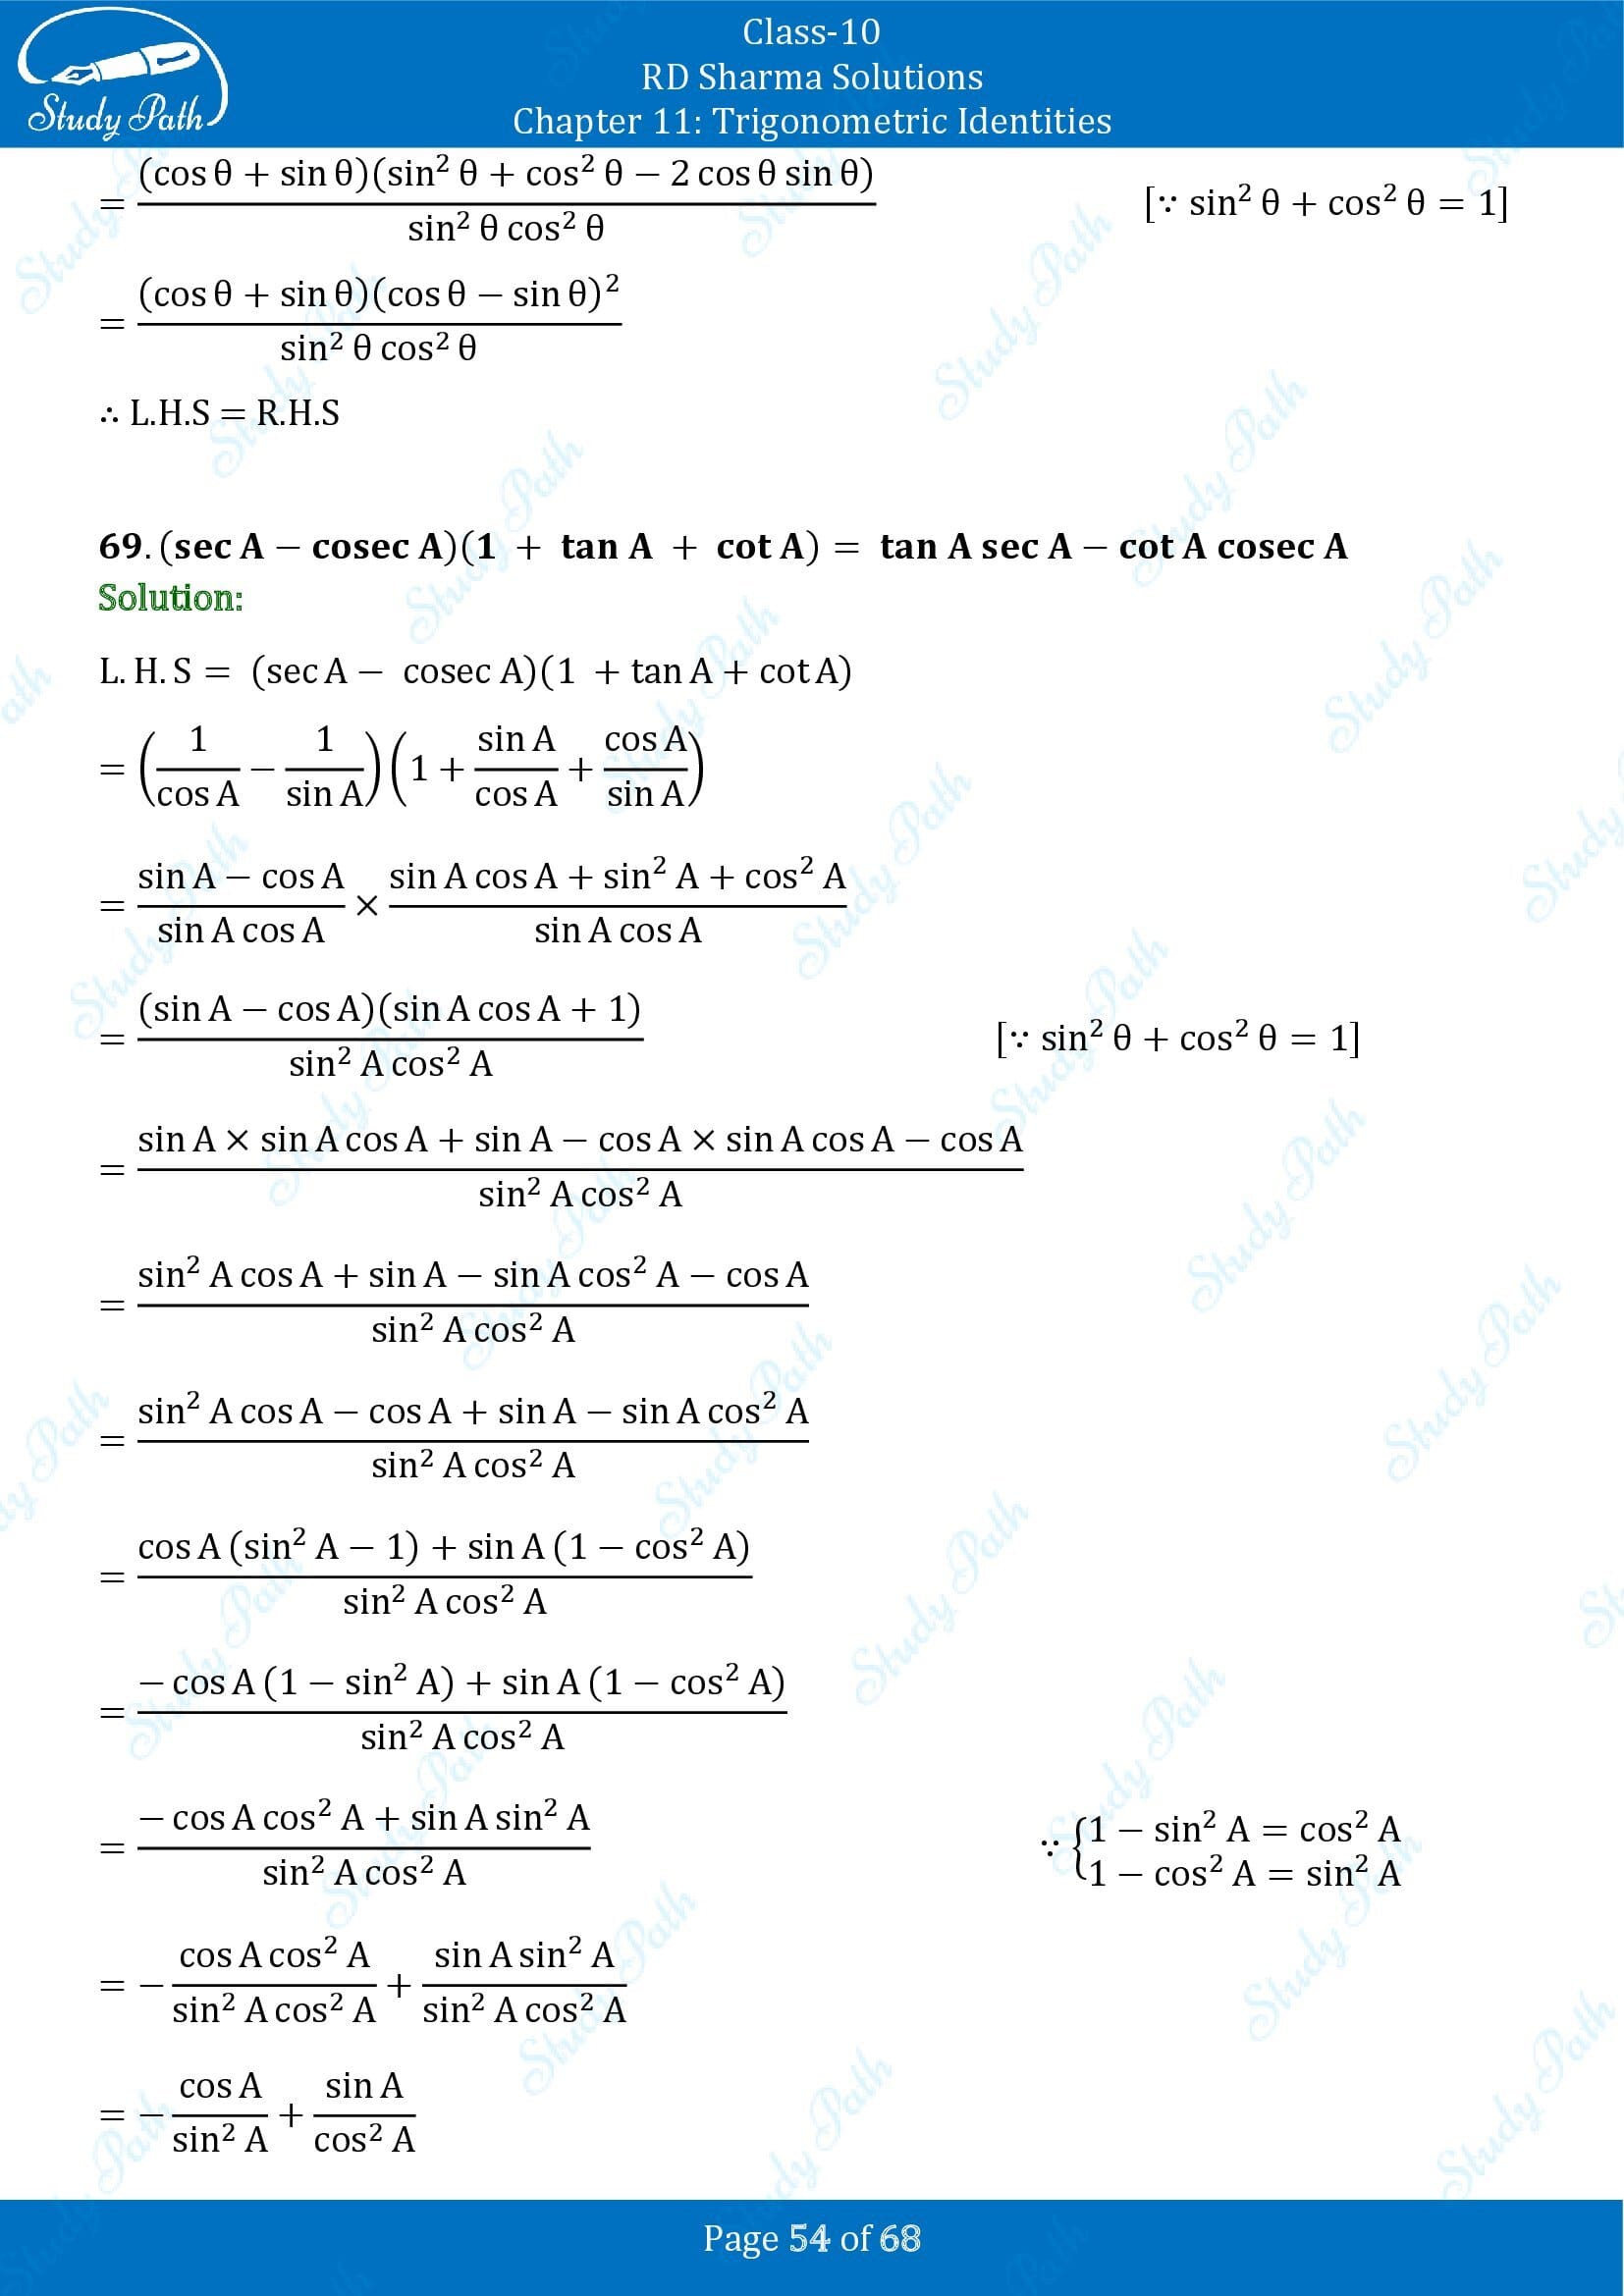 RD Sharma Solutions Class 10 Chapter 11 Trigonometric Identities Exercise 11.1 00054